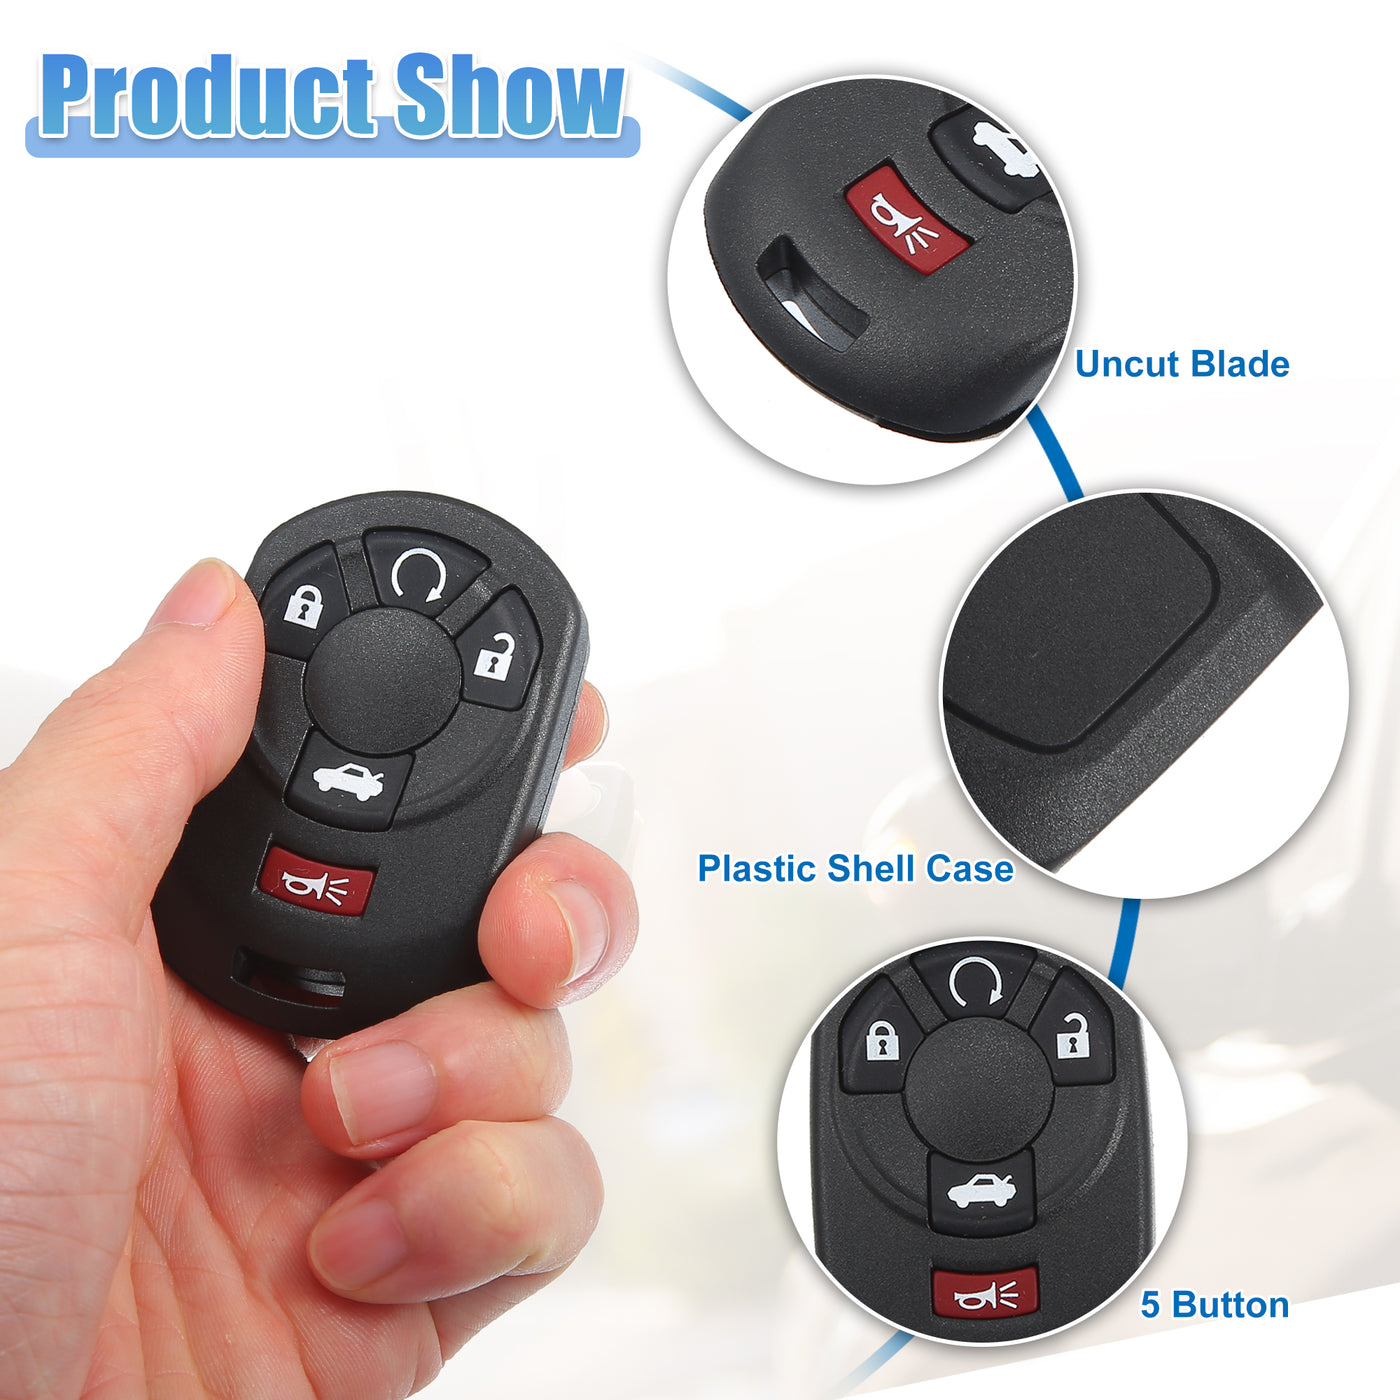 ACROPIX 315 MHz 5 Buttons Keyless Entry Remote Key Fob Fit for Cadillac STS 2005 2006 2007 M3N65981403 - Pack of 1 Black